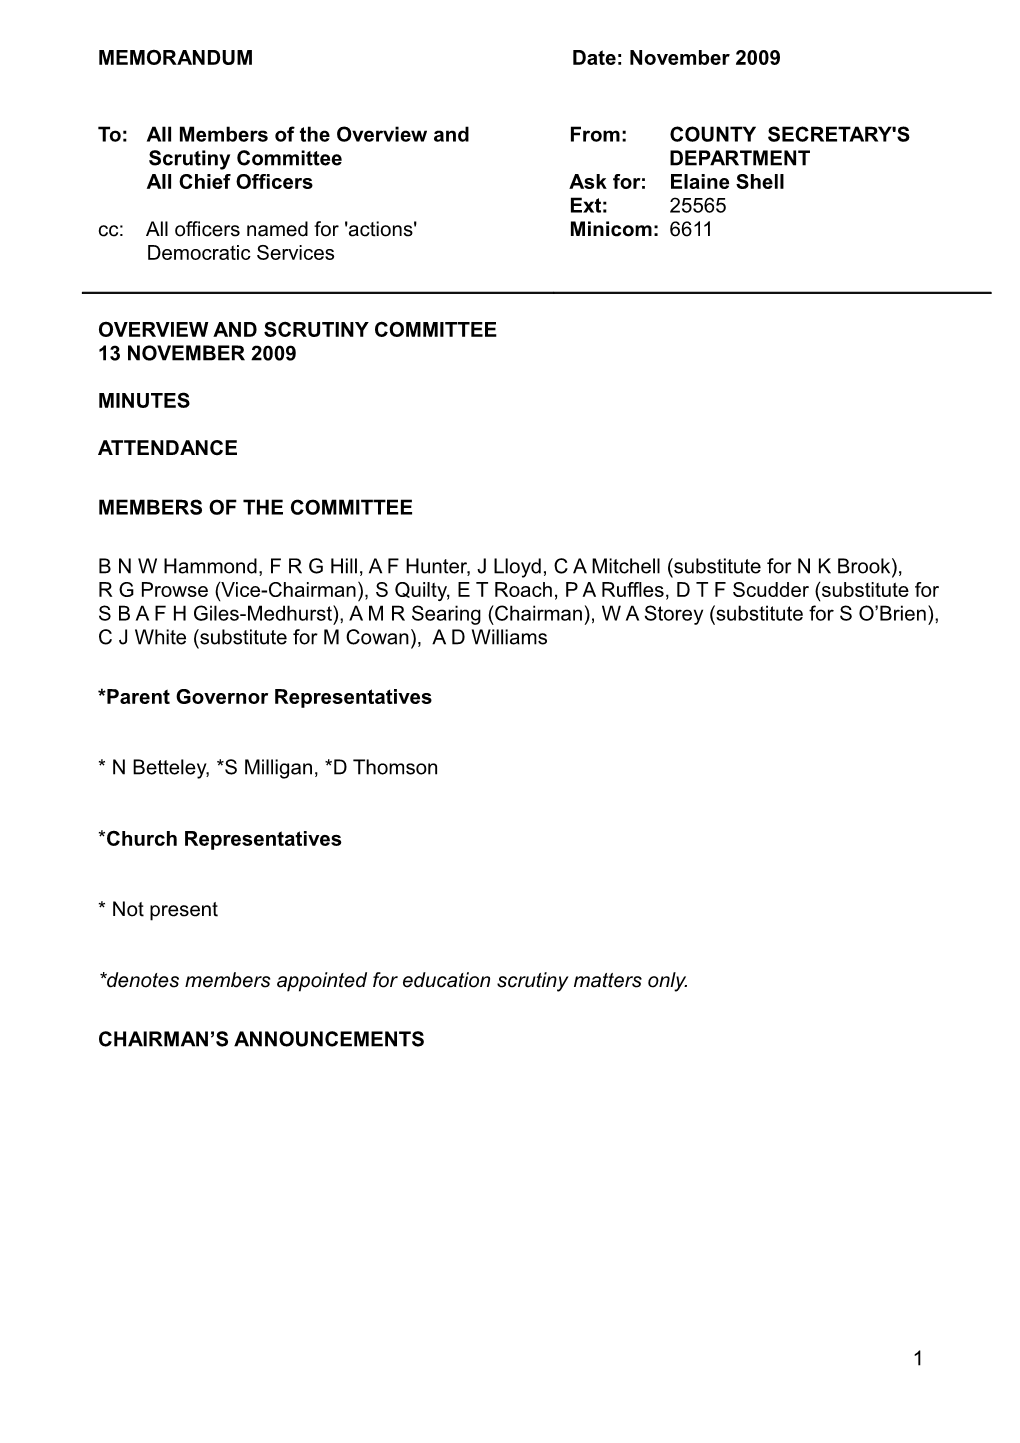 Overview & Scrutiny Committee Minutes 3 July 2008